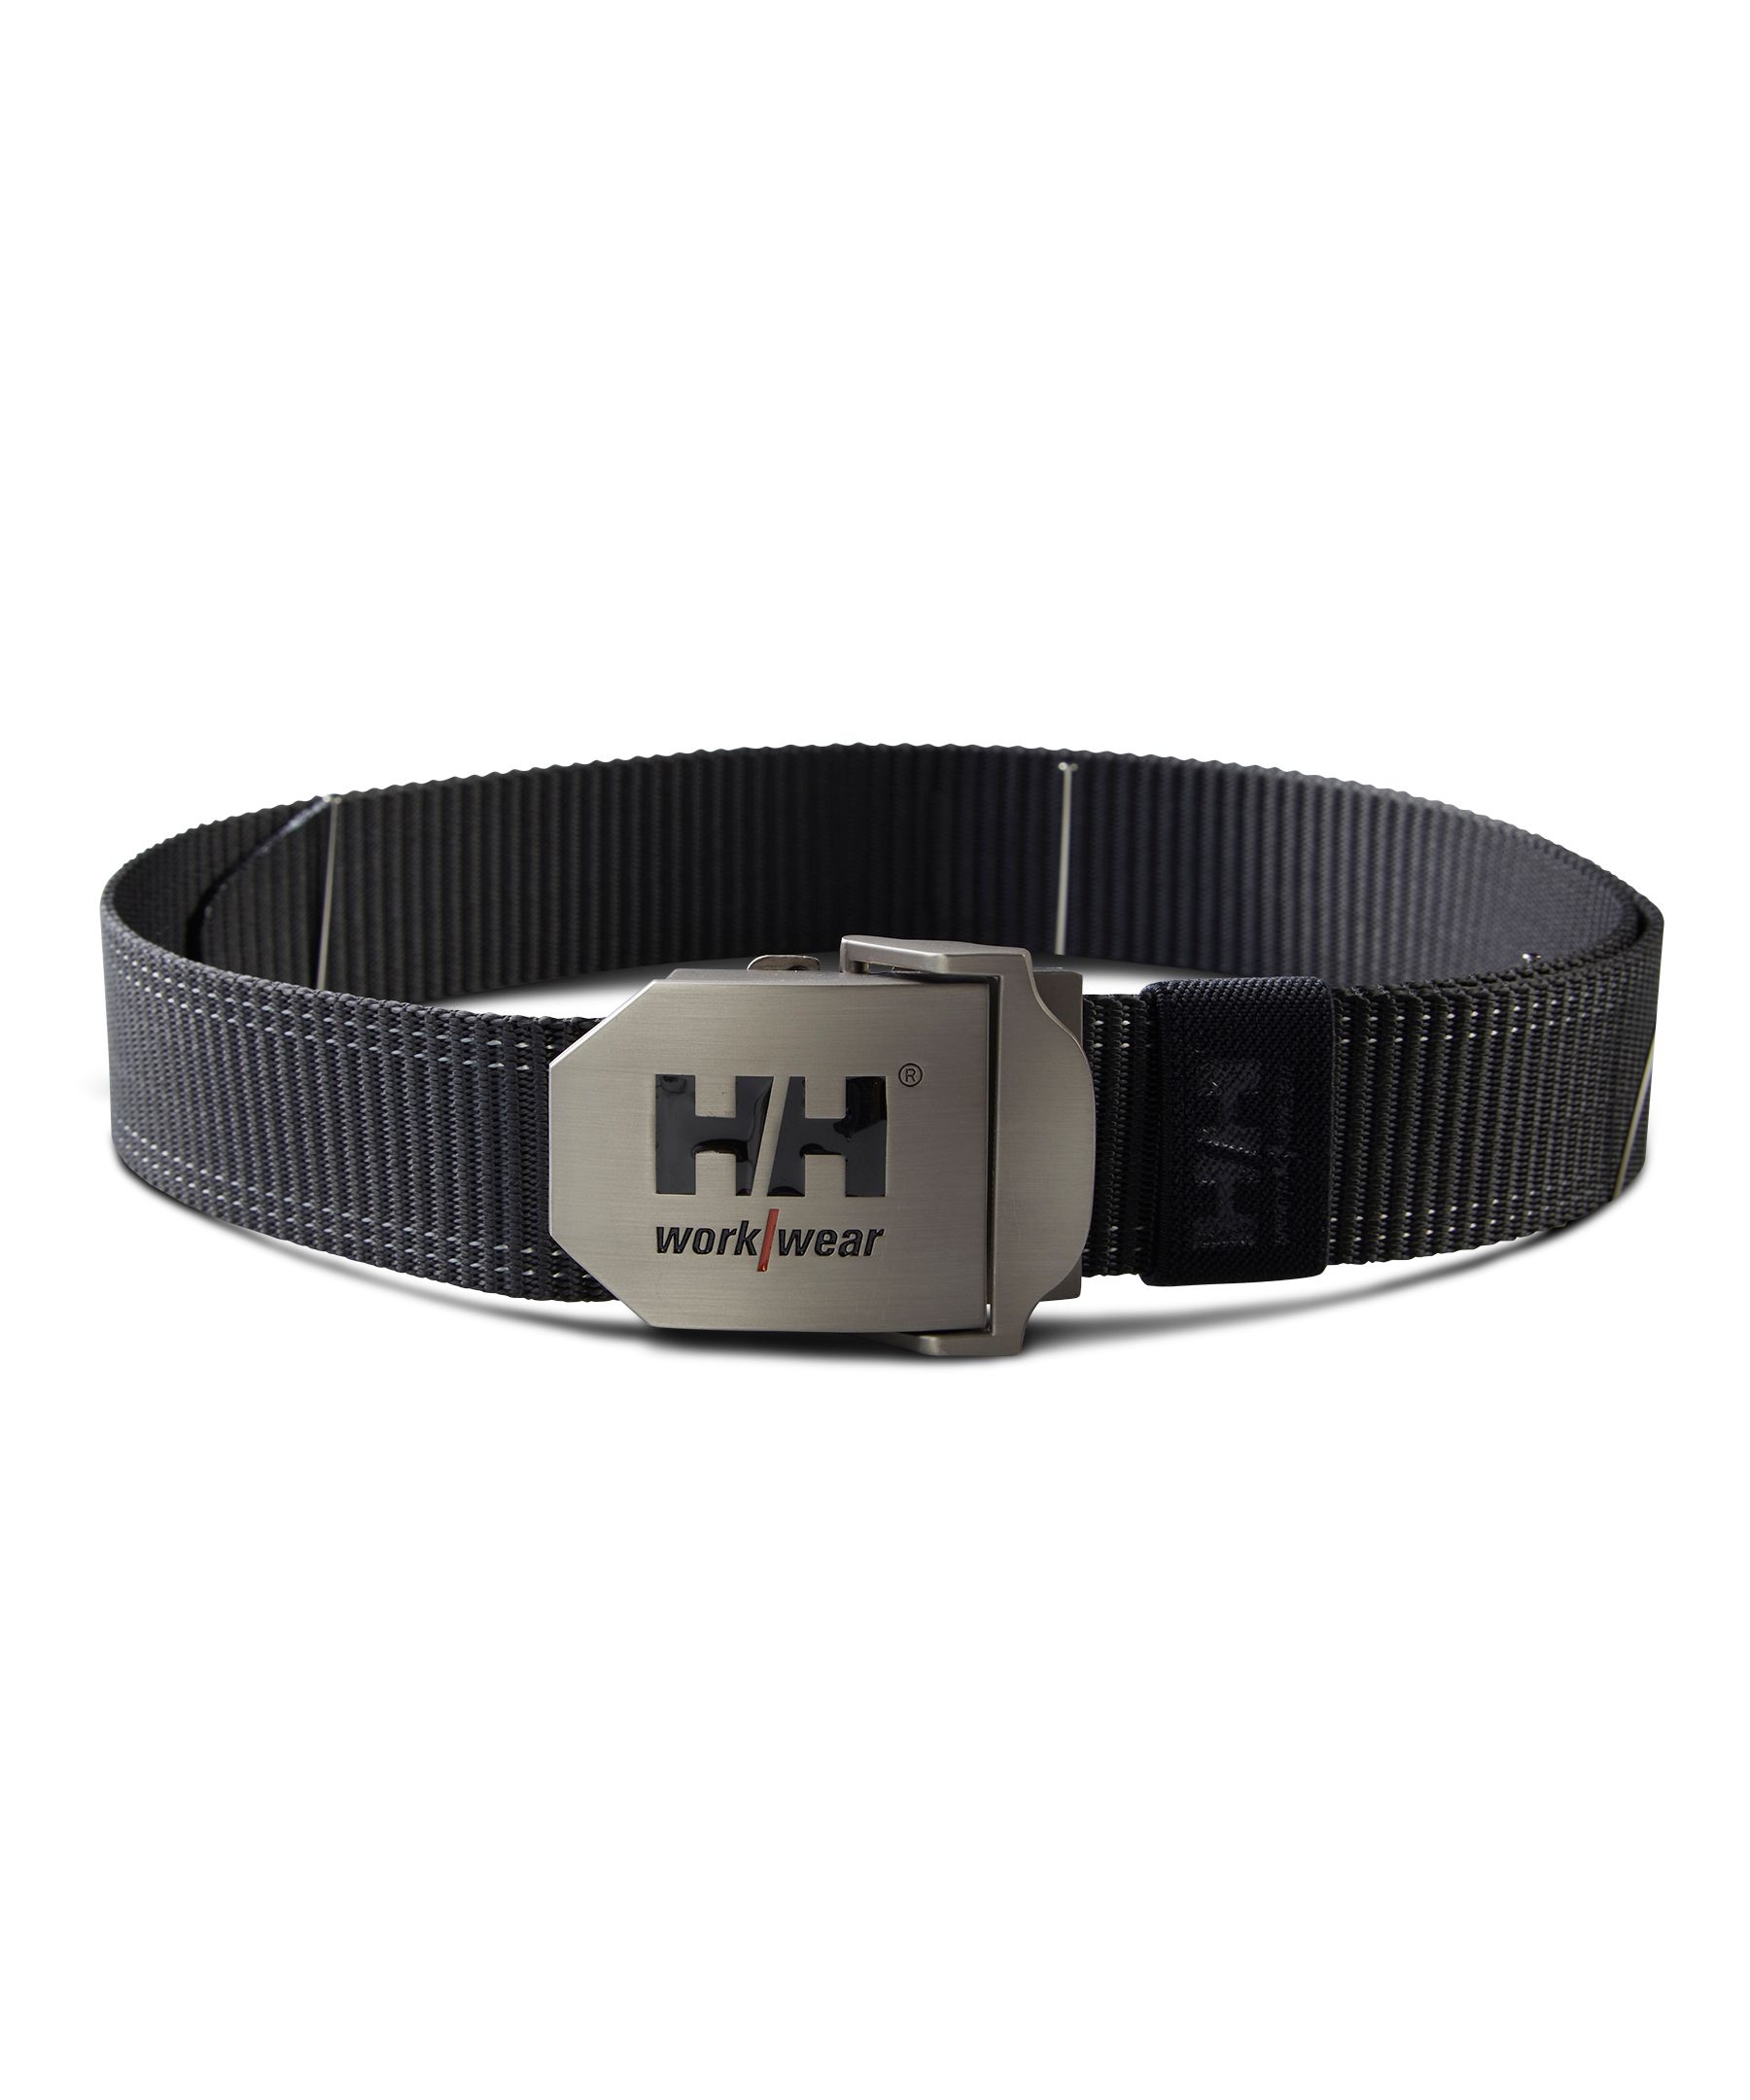 https://media-www.marks.com/product/marks-work-wearhouse/industrial-world/mens-accessories/410036479709/helly-hansen-men-s-workwear-web-belt-with-clamp-on-buckle-6da73510-0632-467a-9f21-a430f24ef65f-jpgrendition.jpg